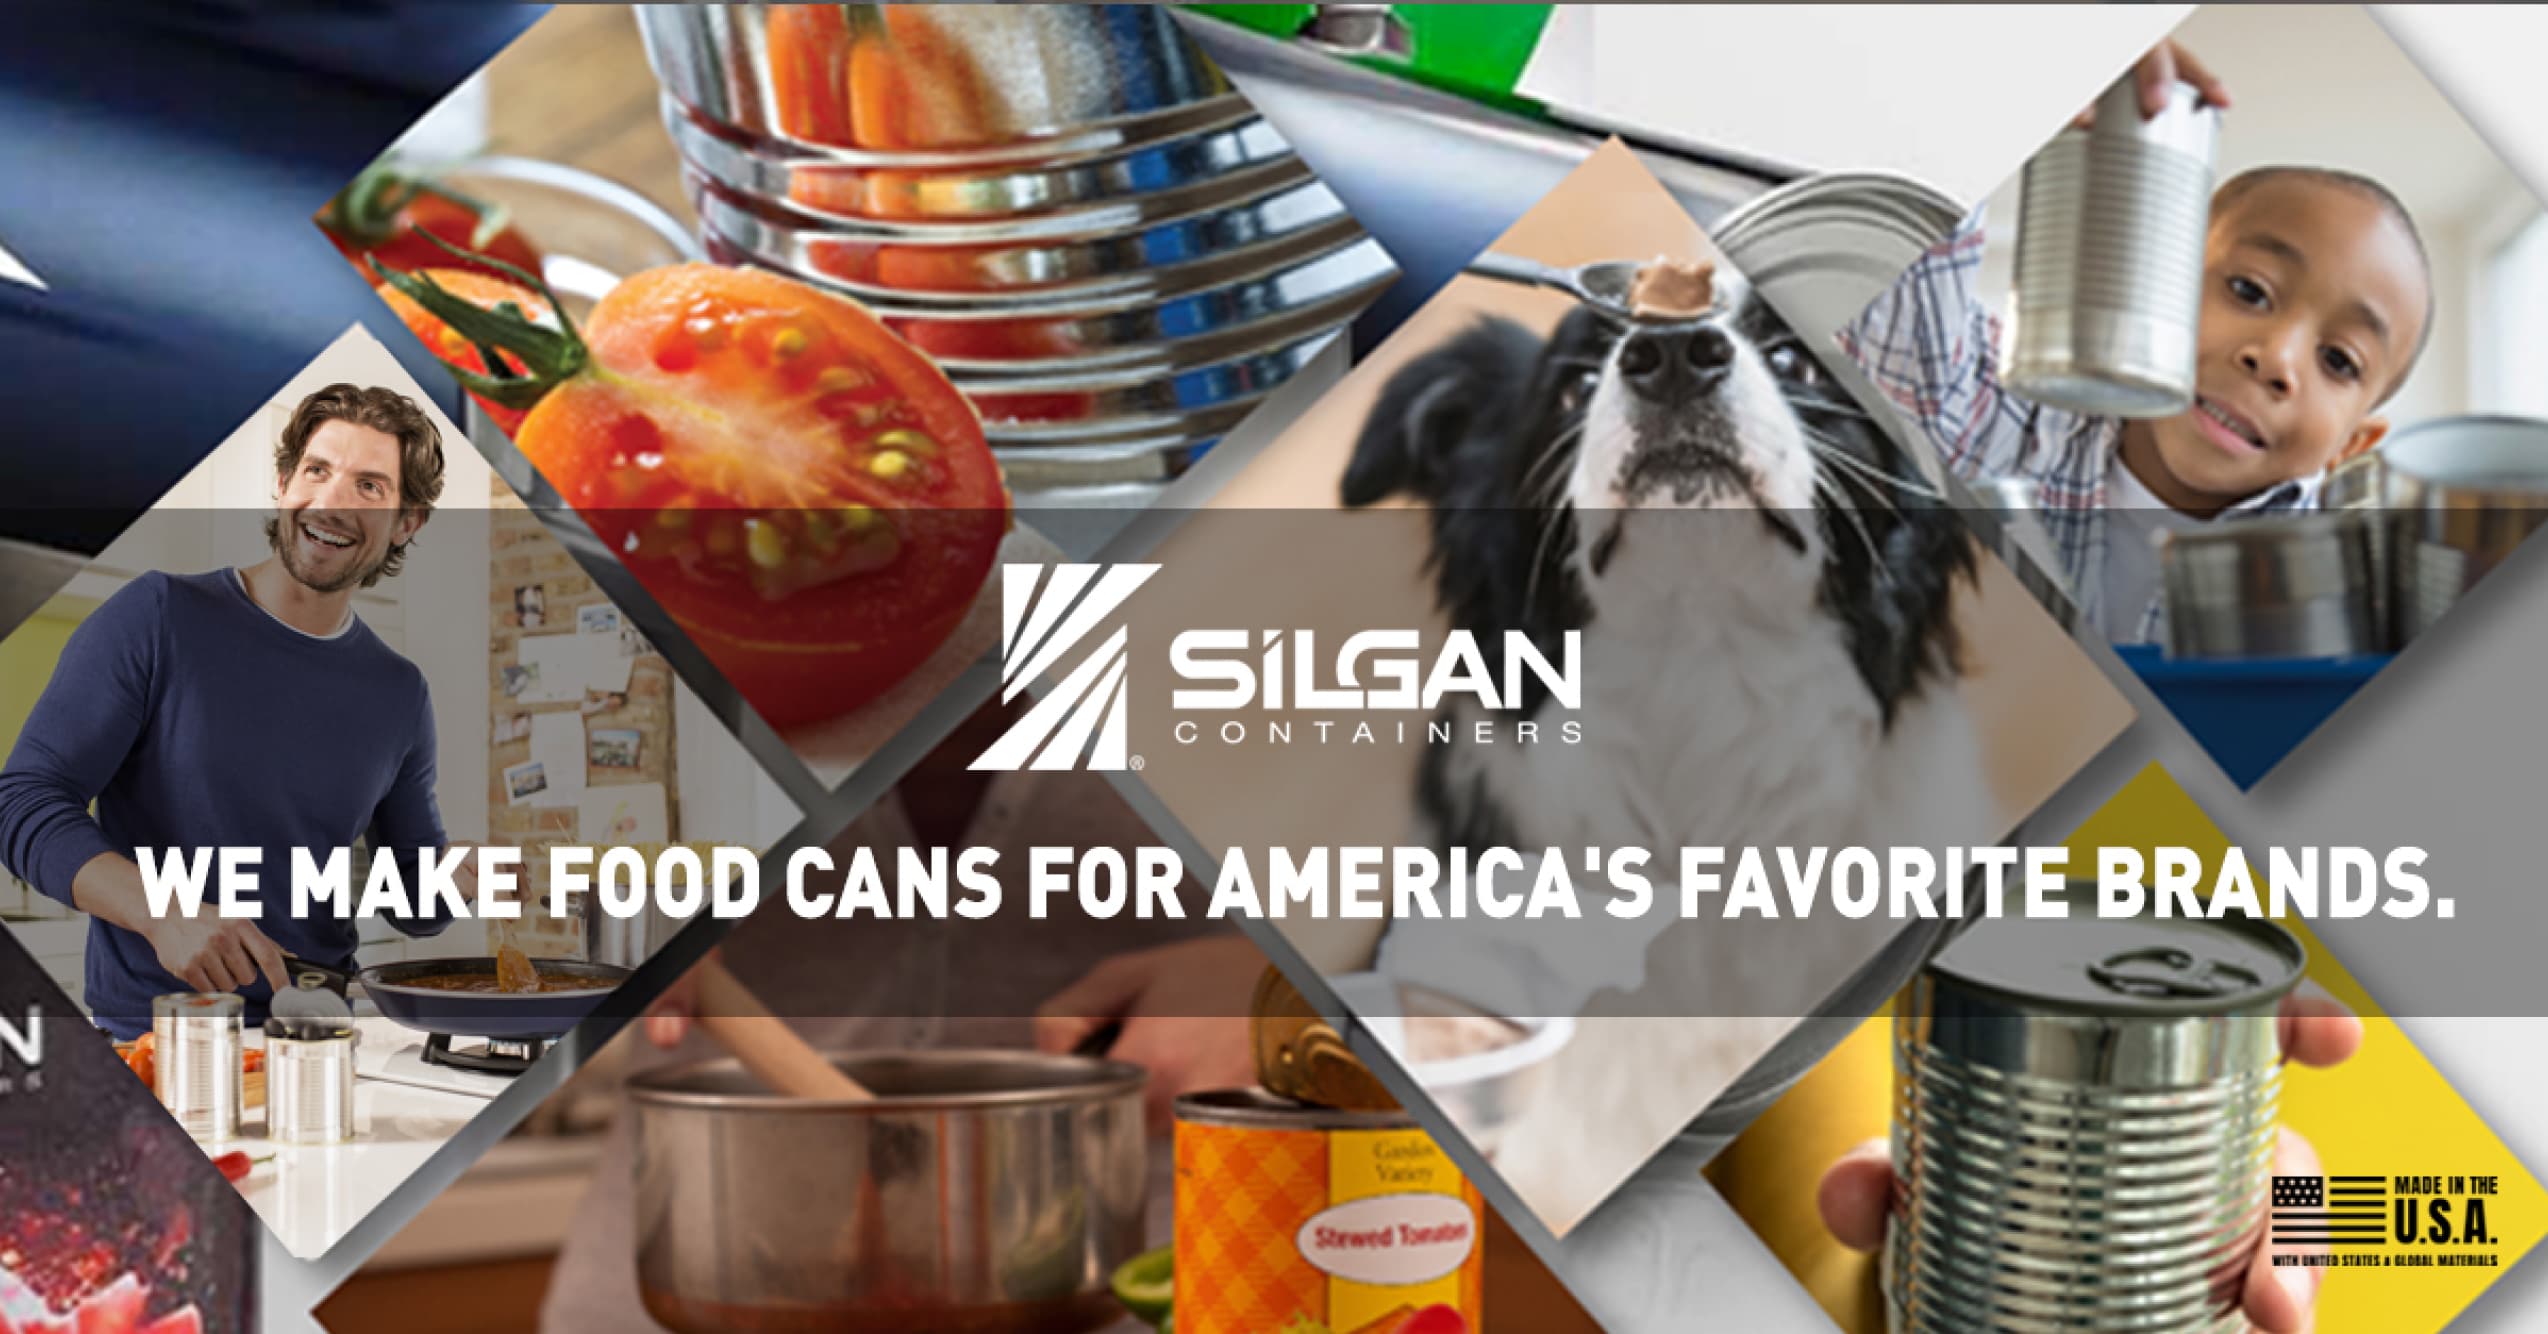 Silgan Containers. We make food cans for America's Favorite Brands.